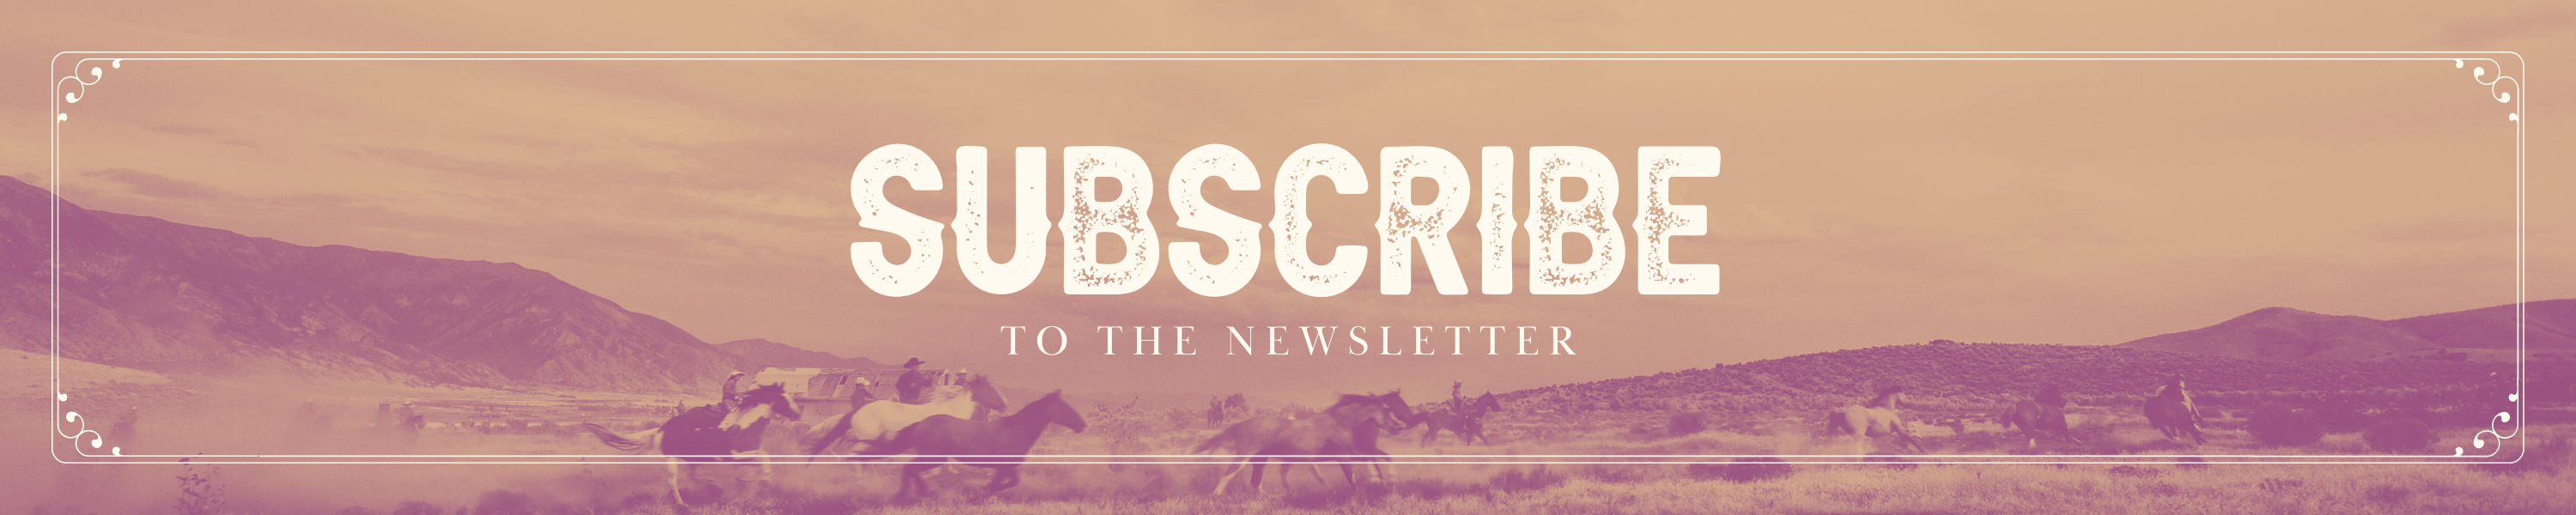 Subscribe to the Newsletter header image